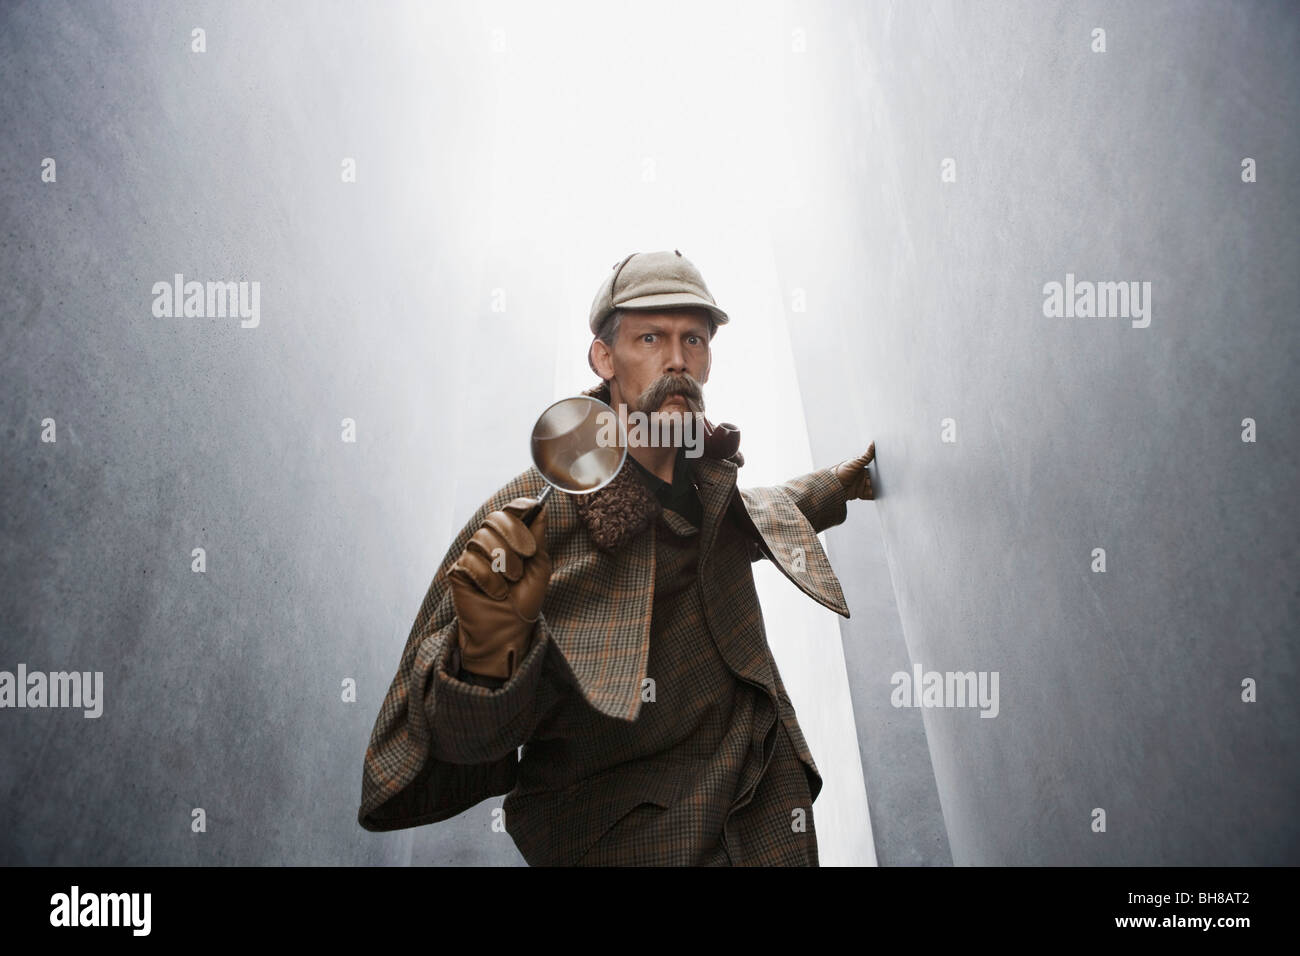 A man dressed like Sherlock Holmes holding a magnifying glass Stock Photo